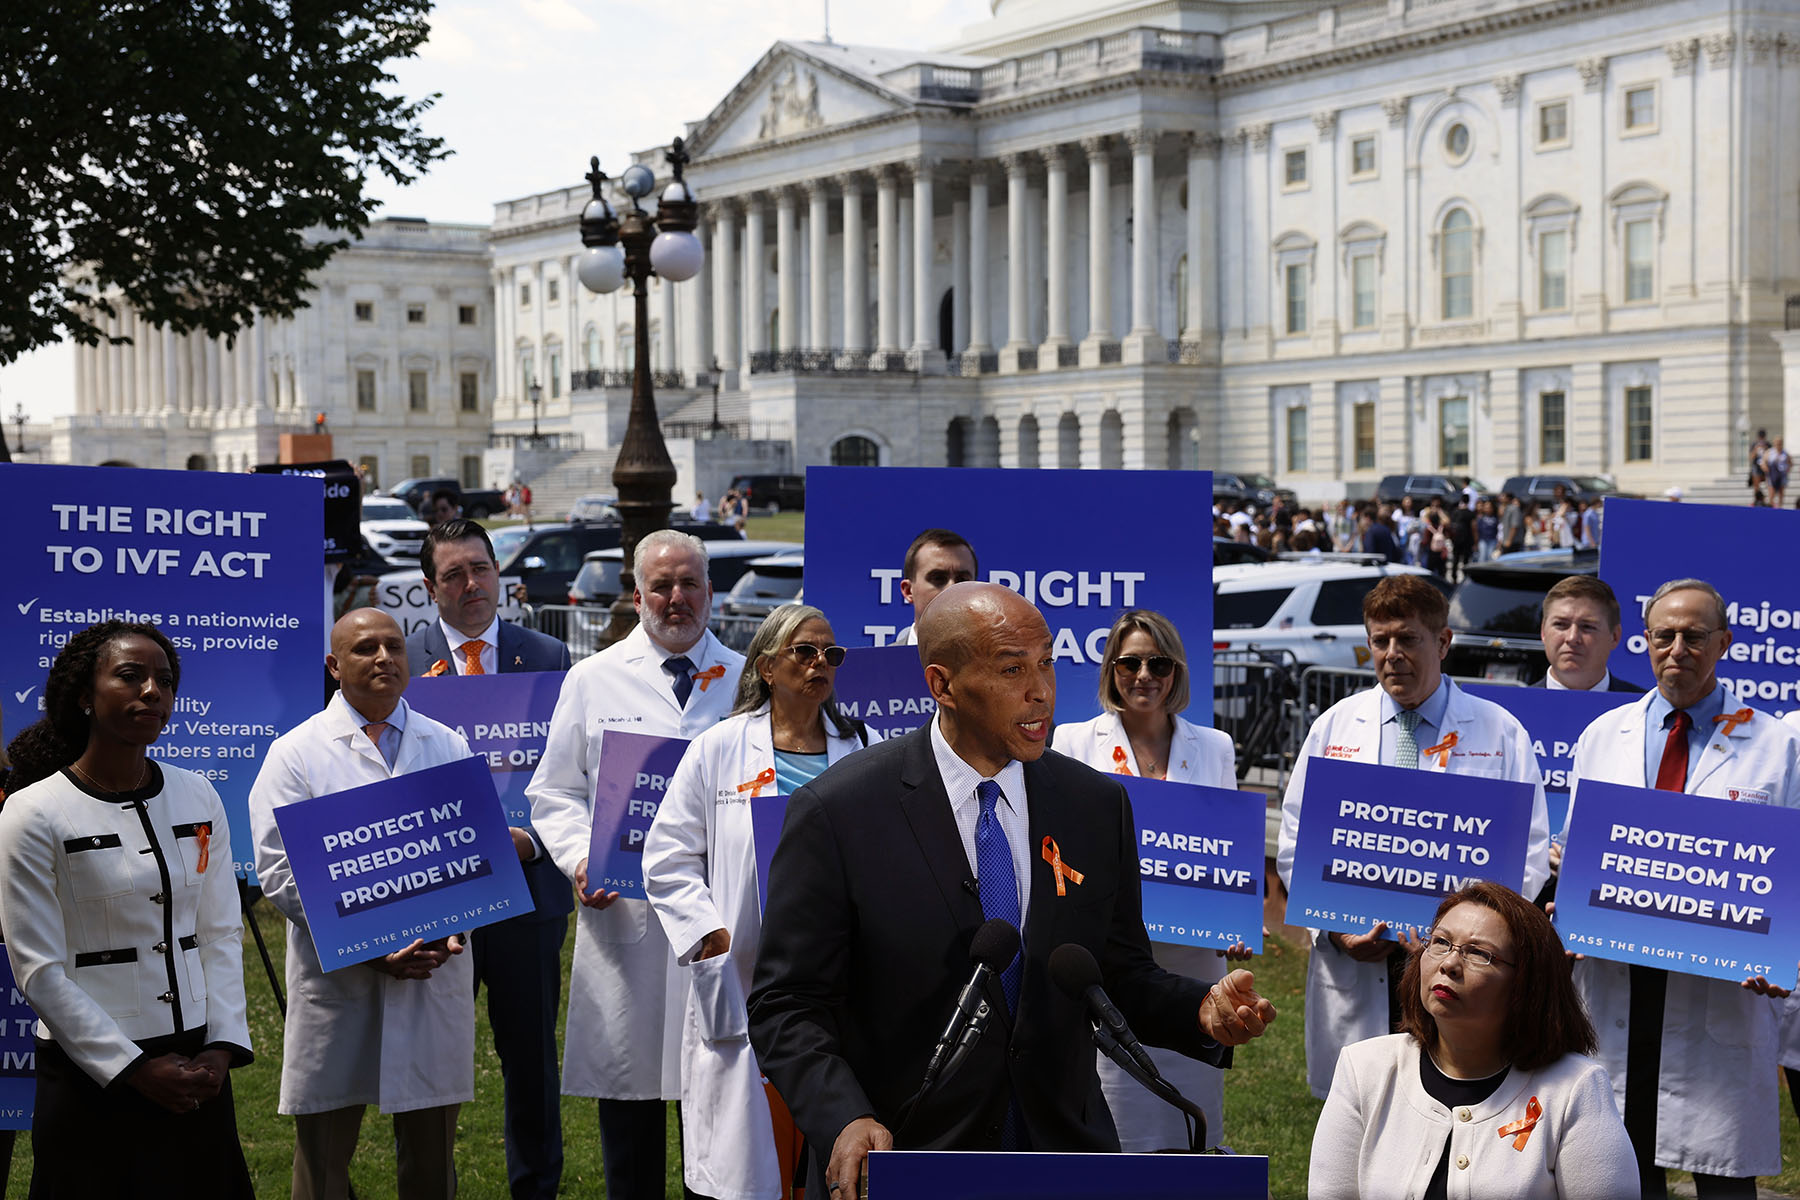 Sen. Cory Booker speaks during a news conference on access to IVF treatments outside of the Capitol Building. He is surrounded by doctors holding signs that read 